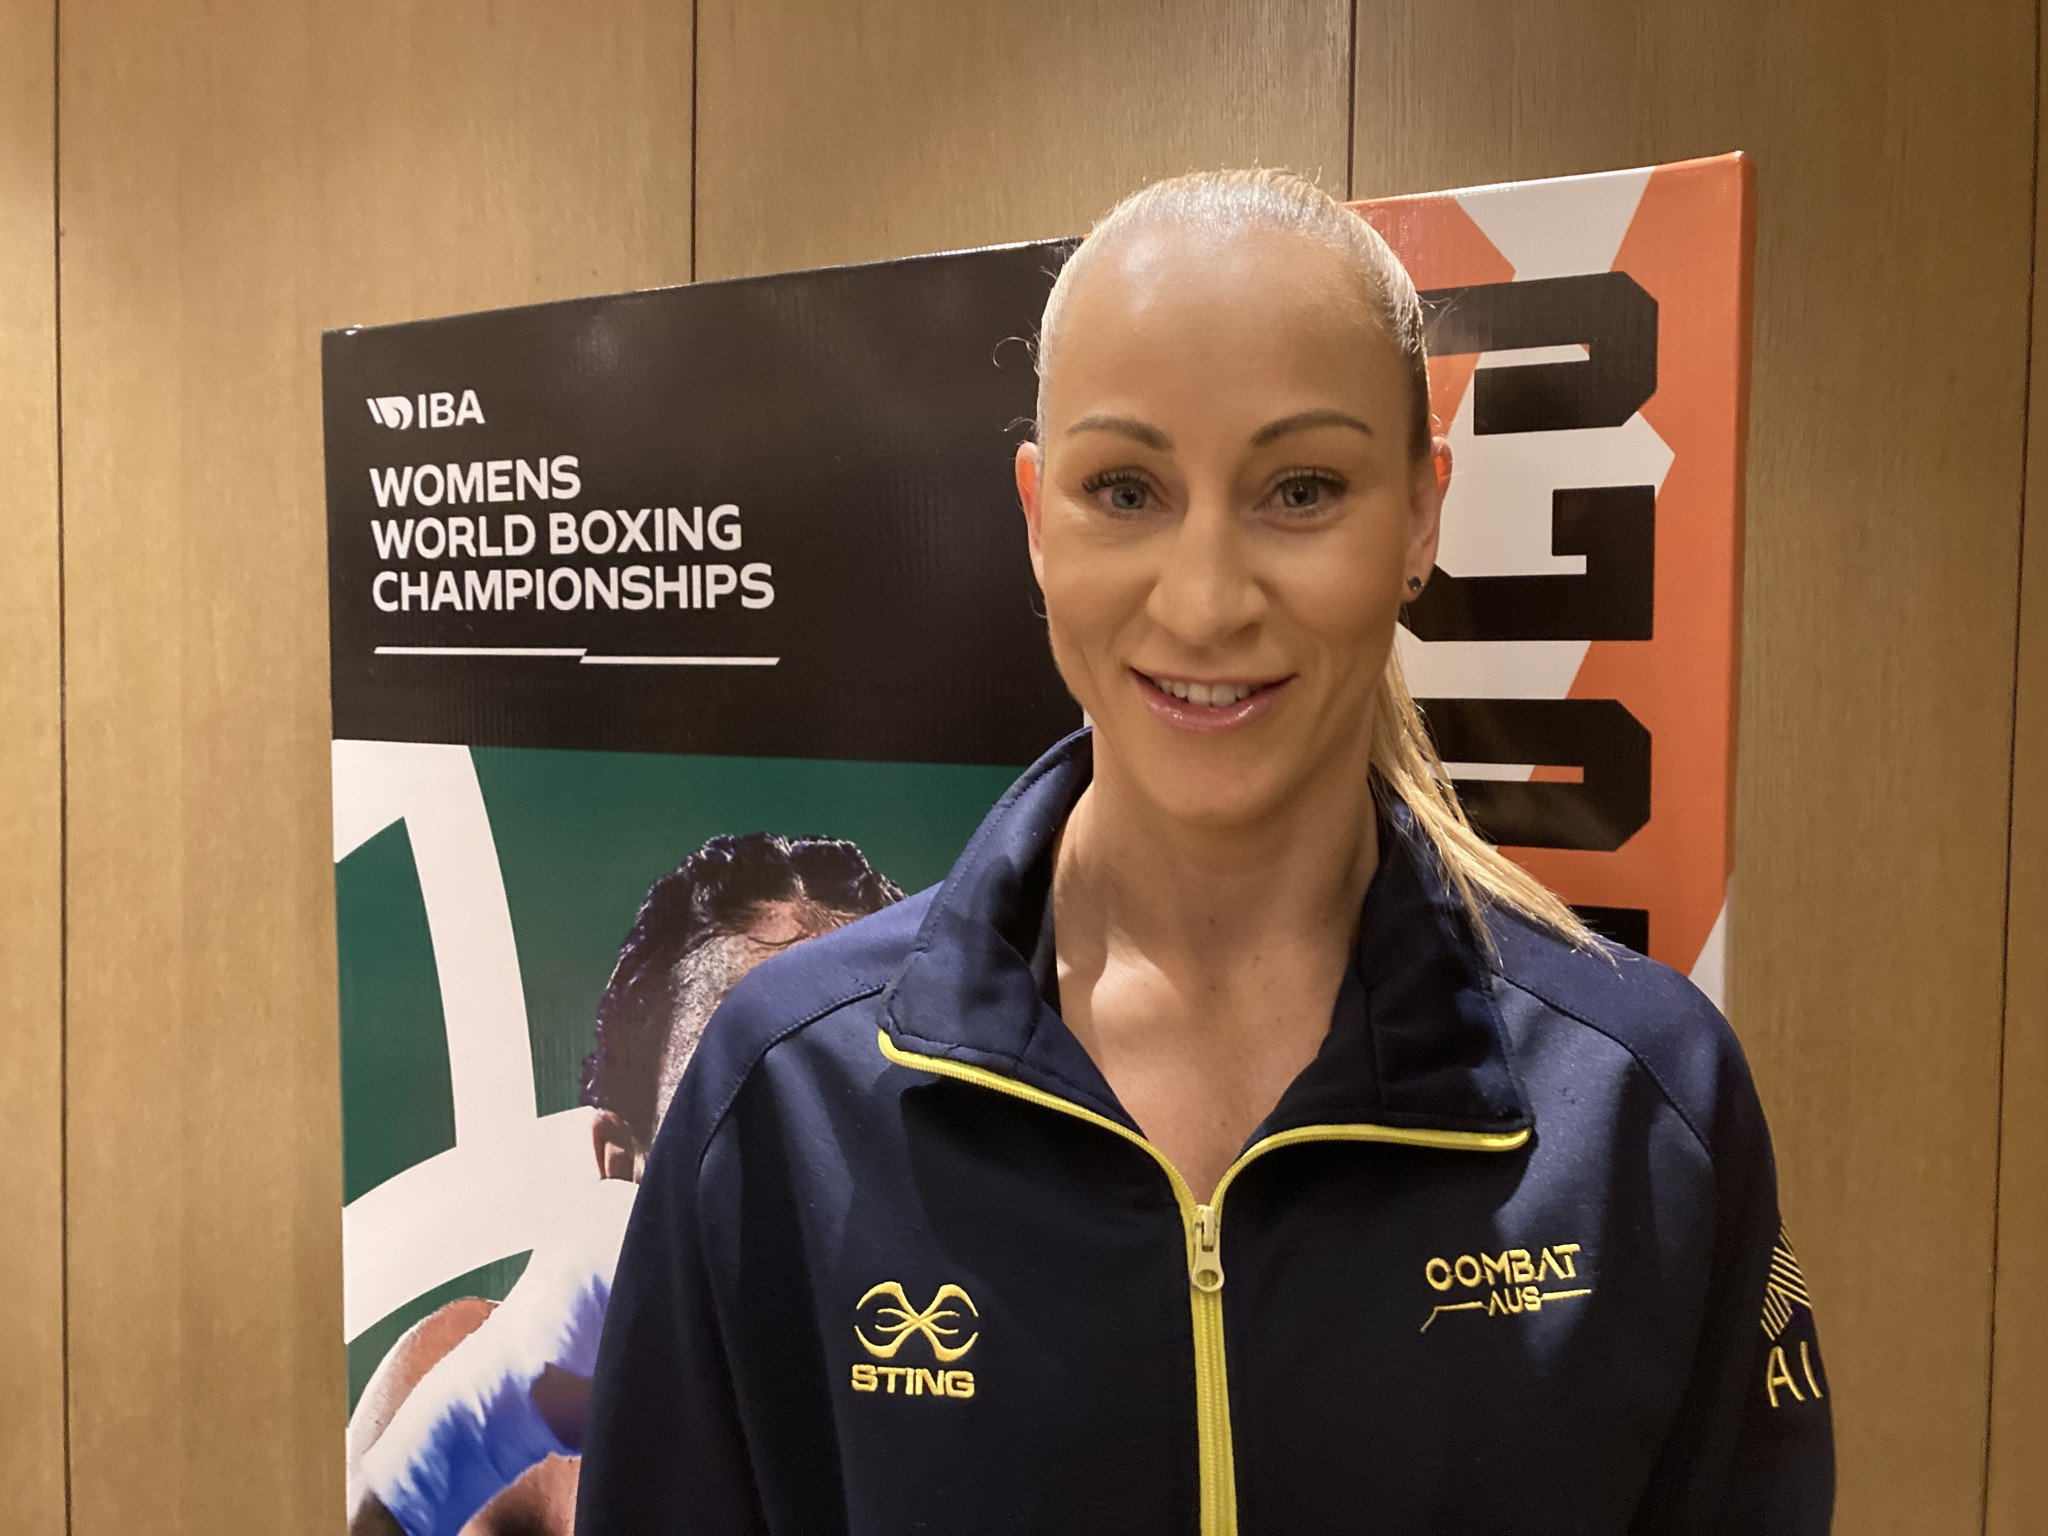 Kaye Scott has called for the IBA's age restrictions to be removed to allow her to continue competing in her forties ©ITG